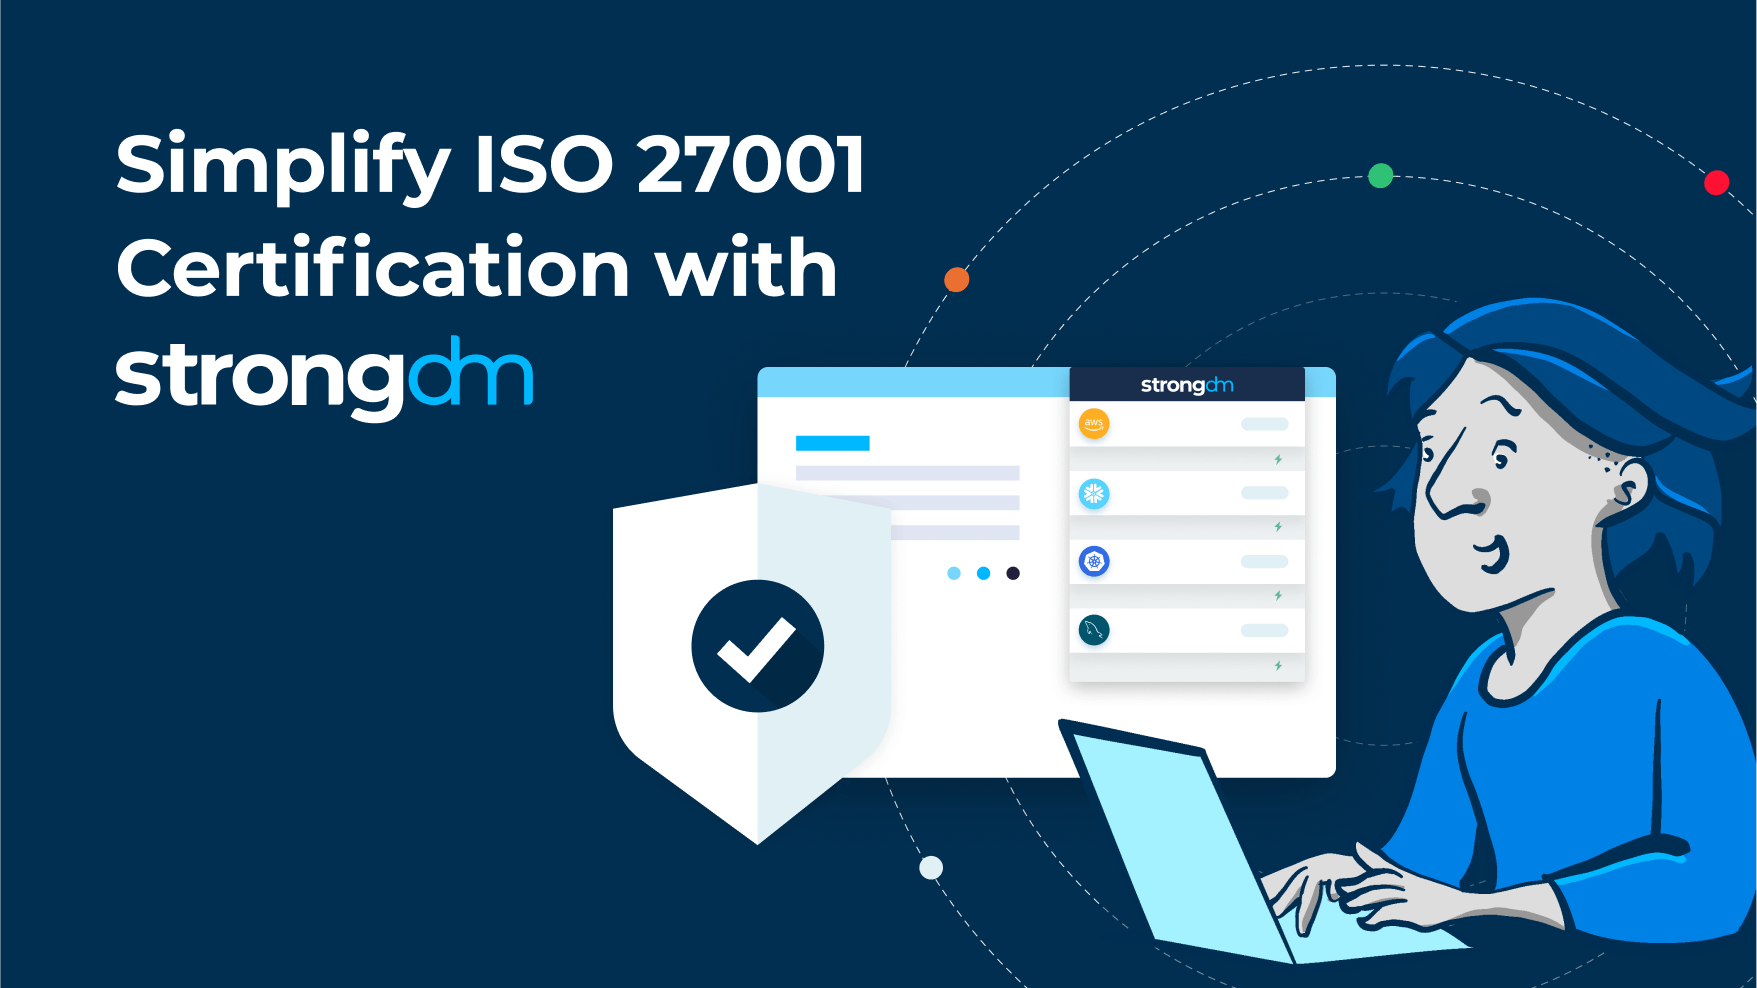 Simplify ISO 27001 Certification